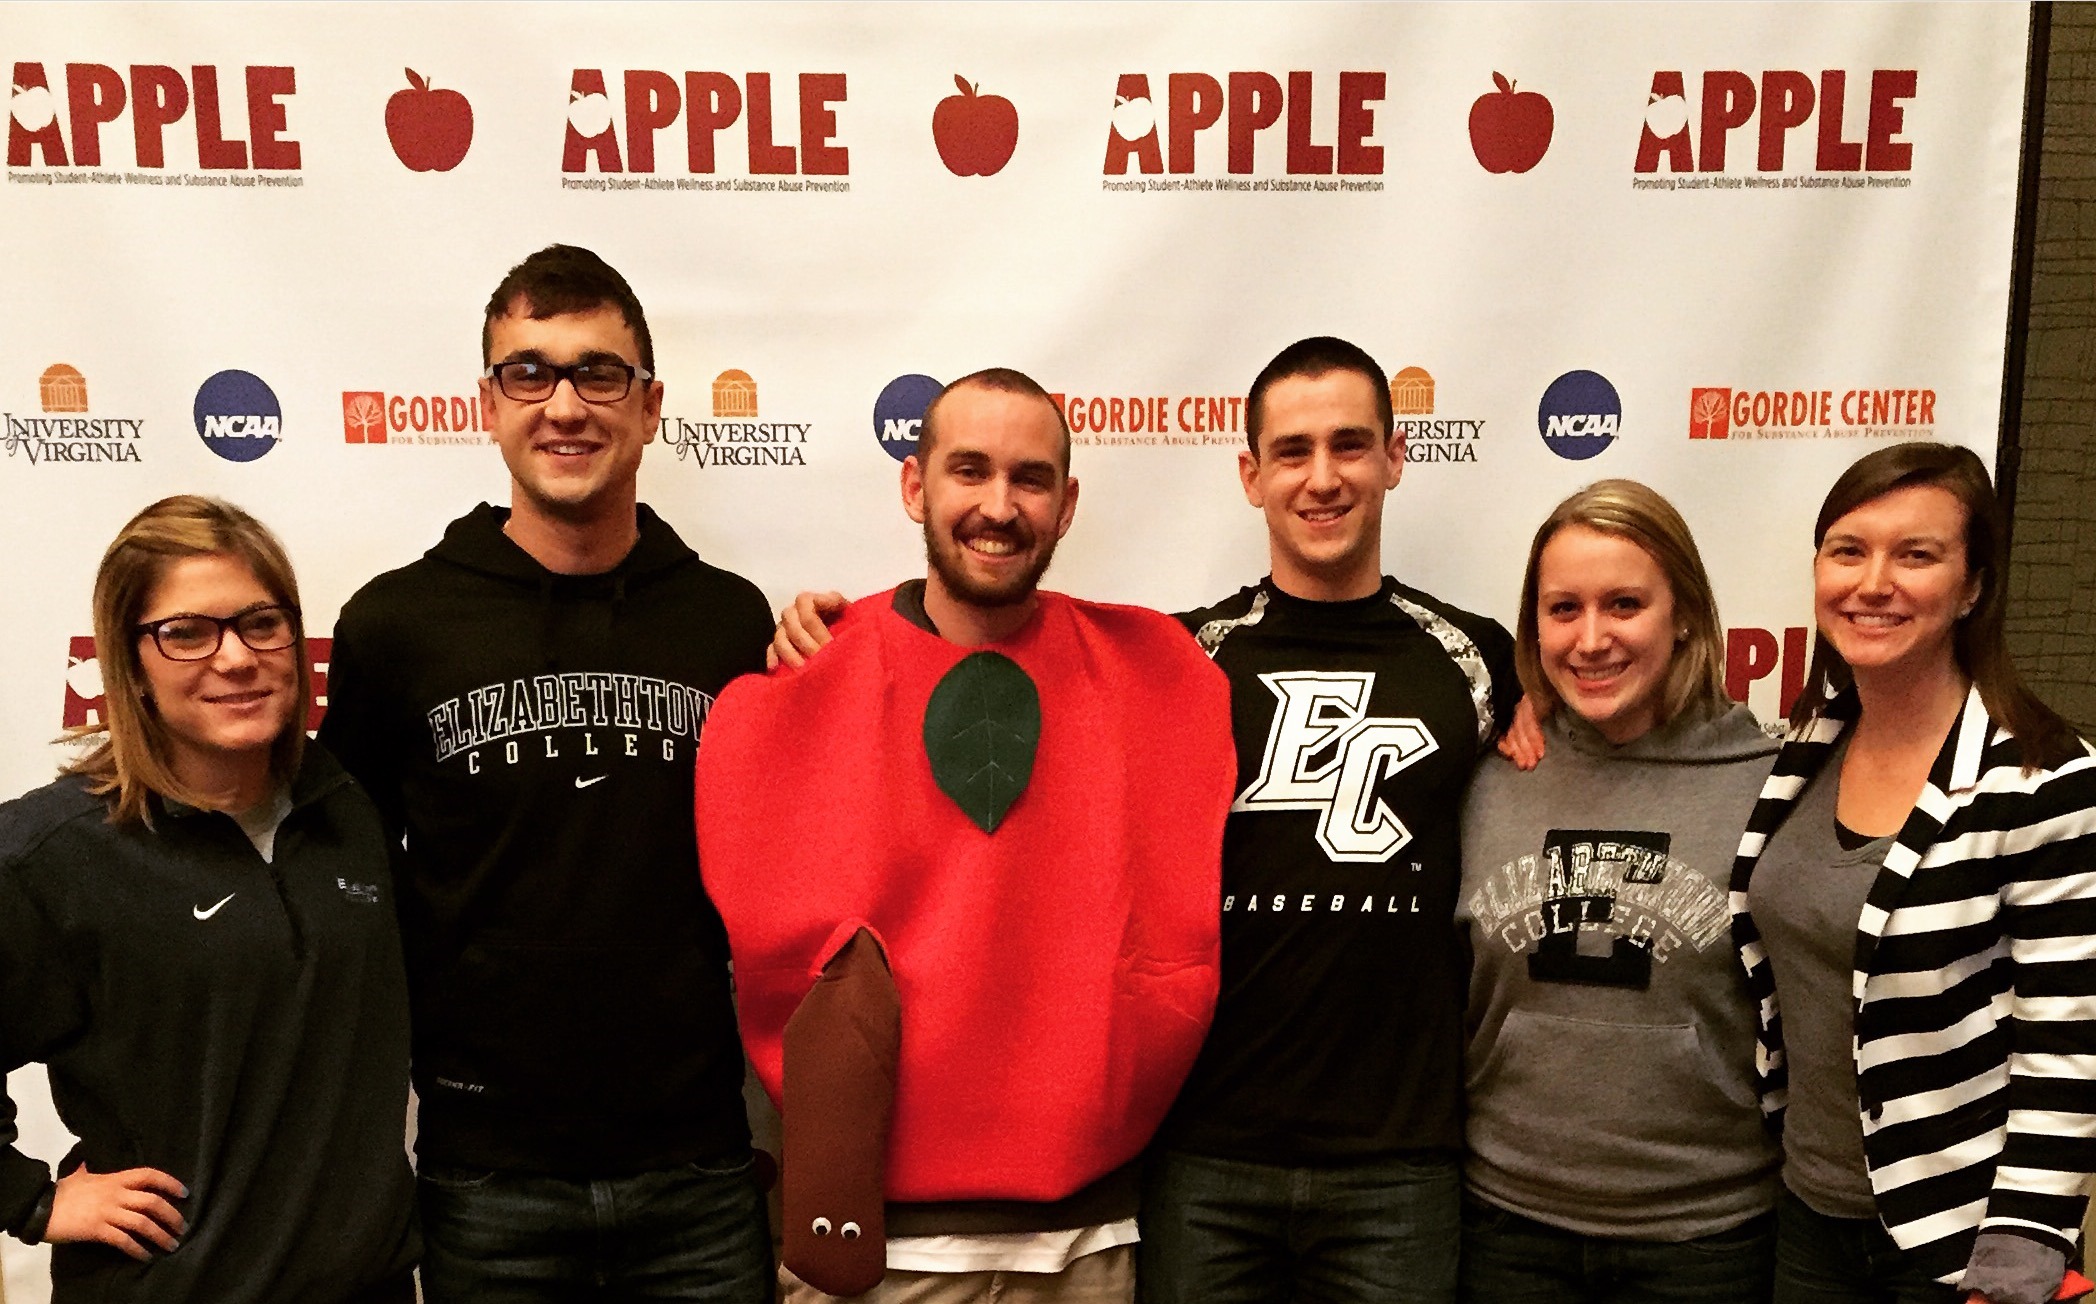 E-town Students, Staff Members Attend NCAA APPLE Conference